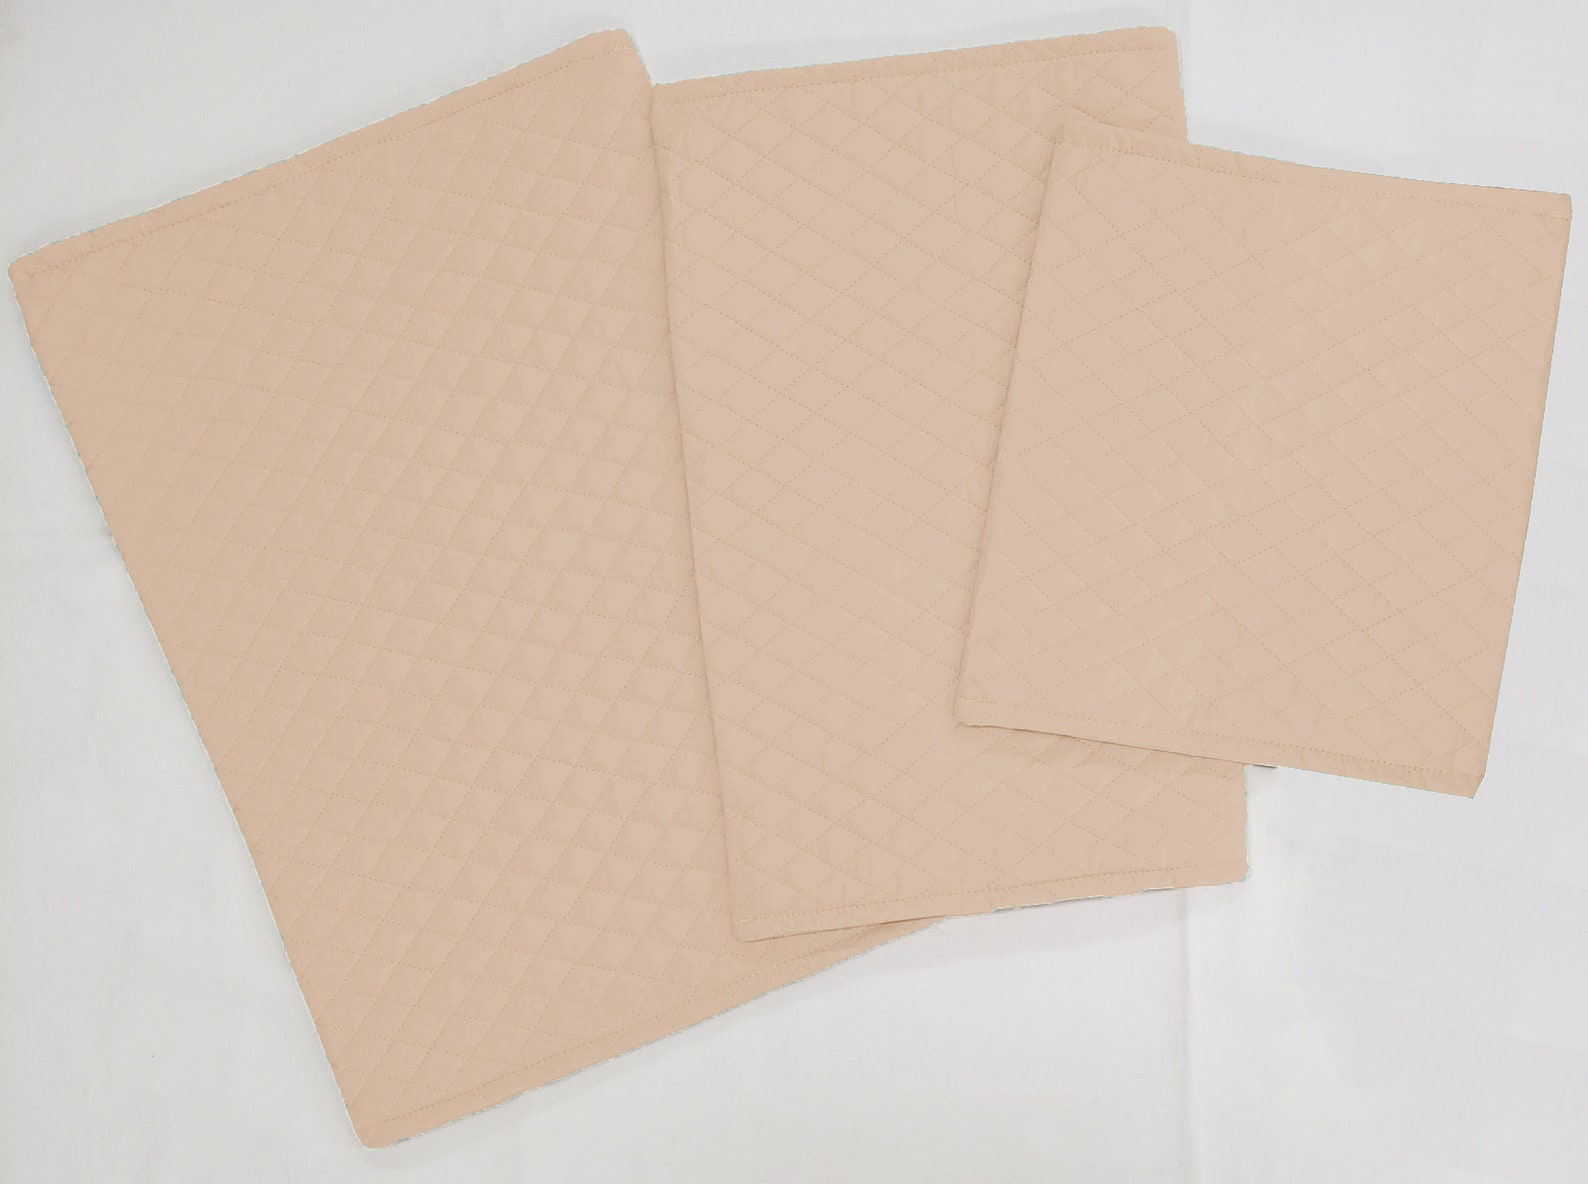 Countertop Appliance Slider Mats by Penny's Needful Things (Quilted Tan) Large, Size: Large: One Slider Mat 15 x 20 inch, Green